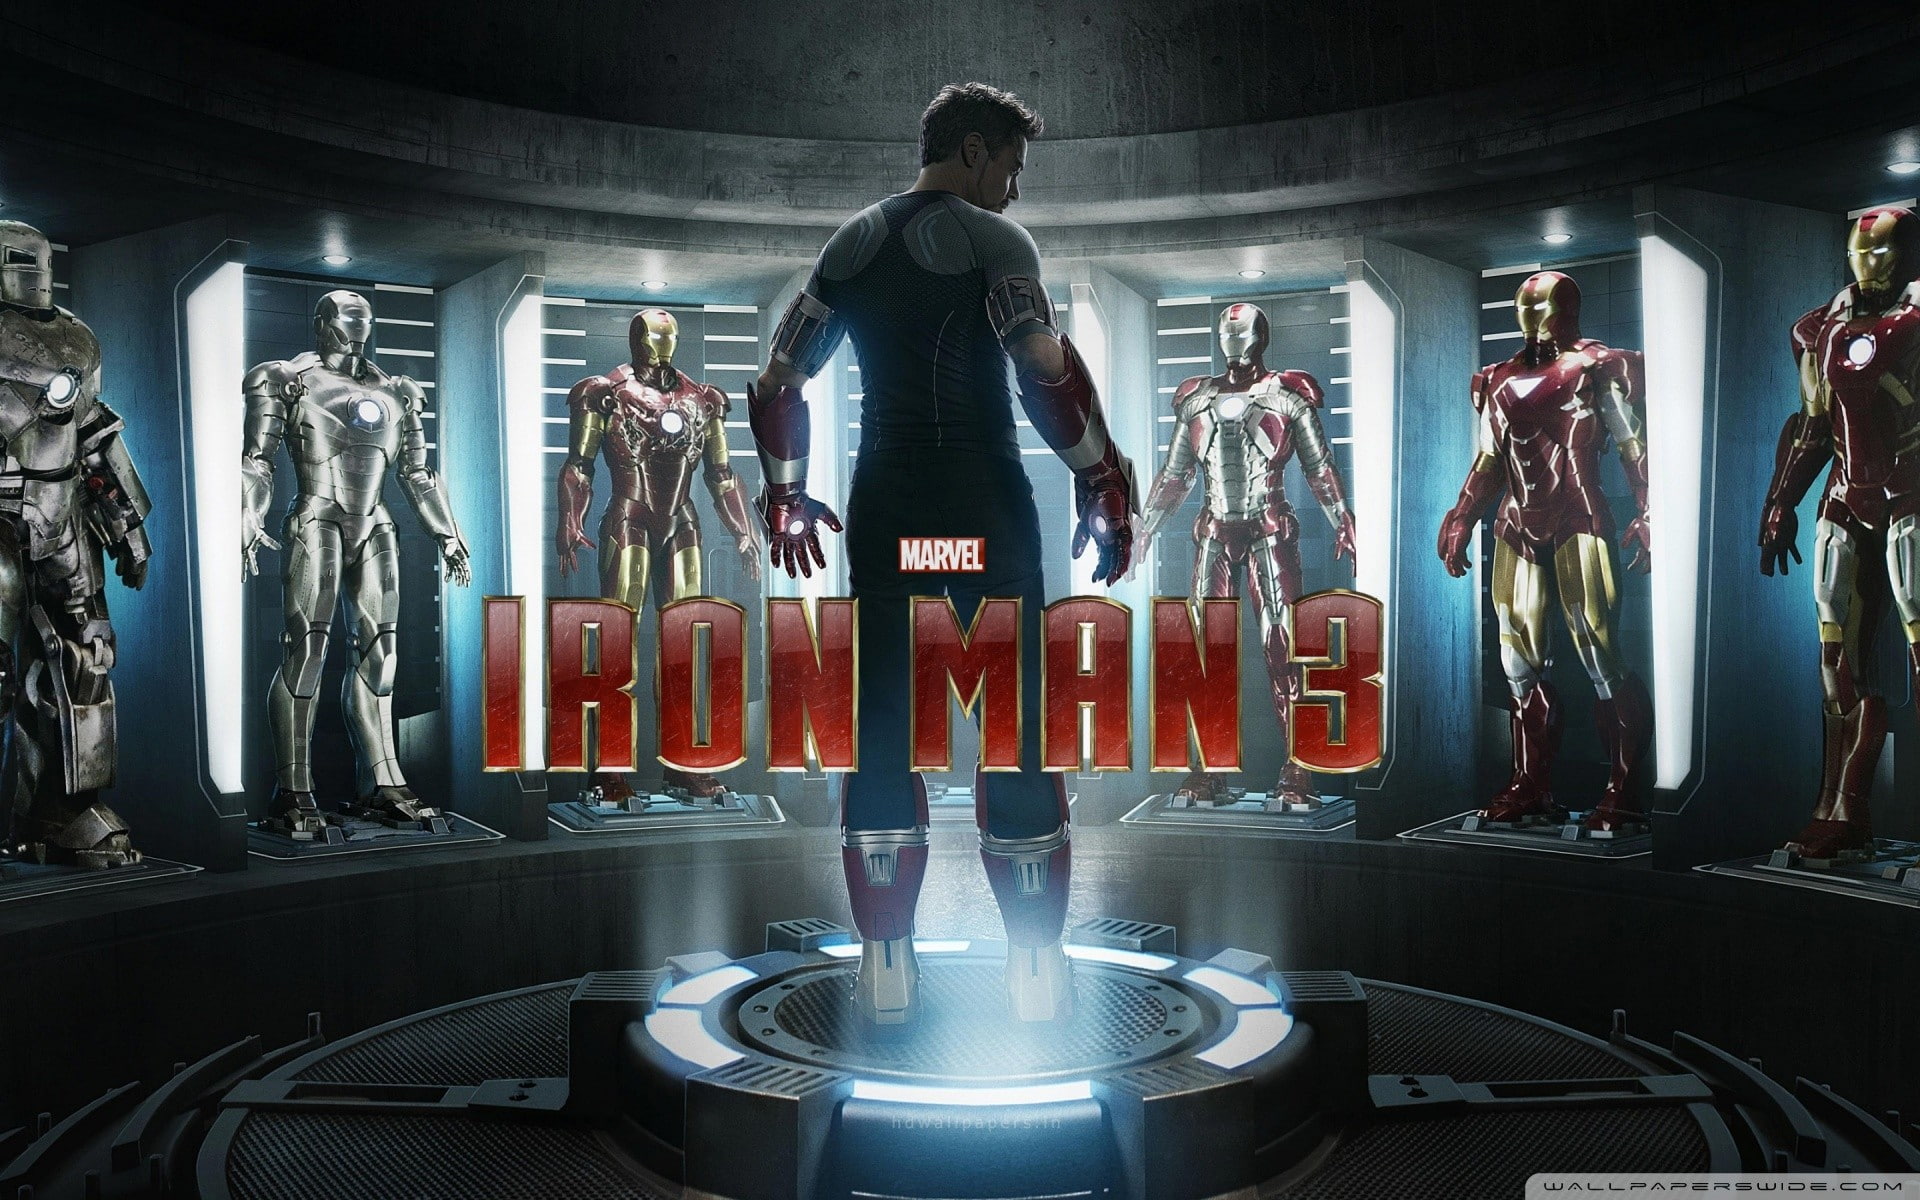 Iron Man, Iron Man 3, standing, indoors, one person, rear view